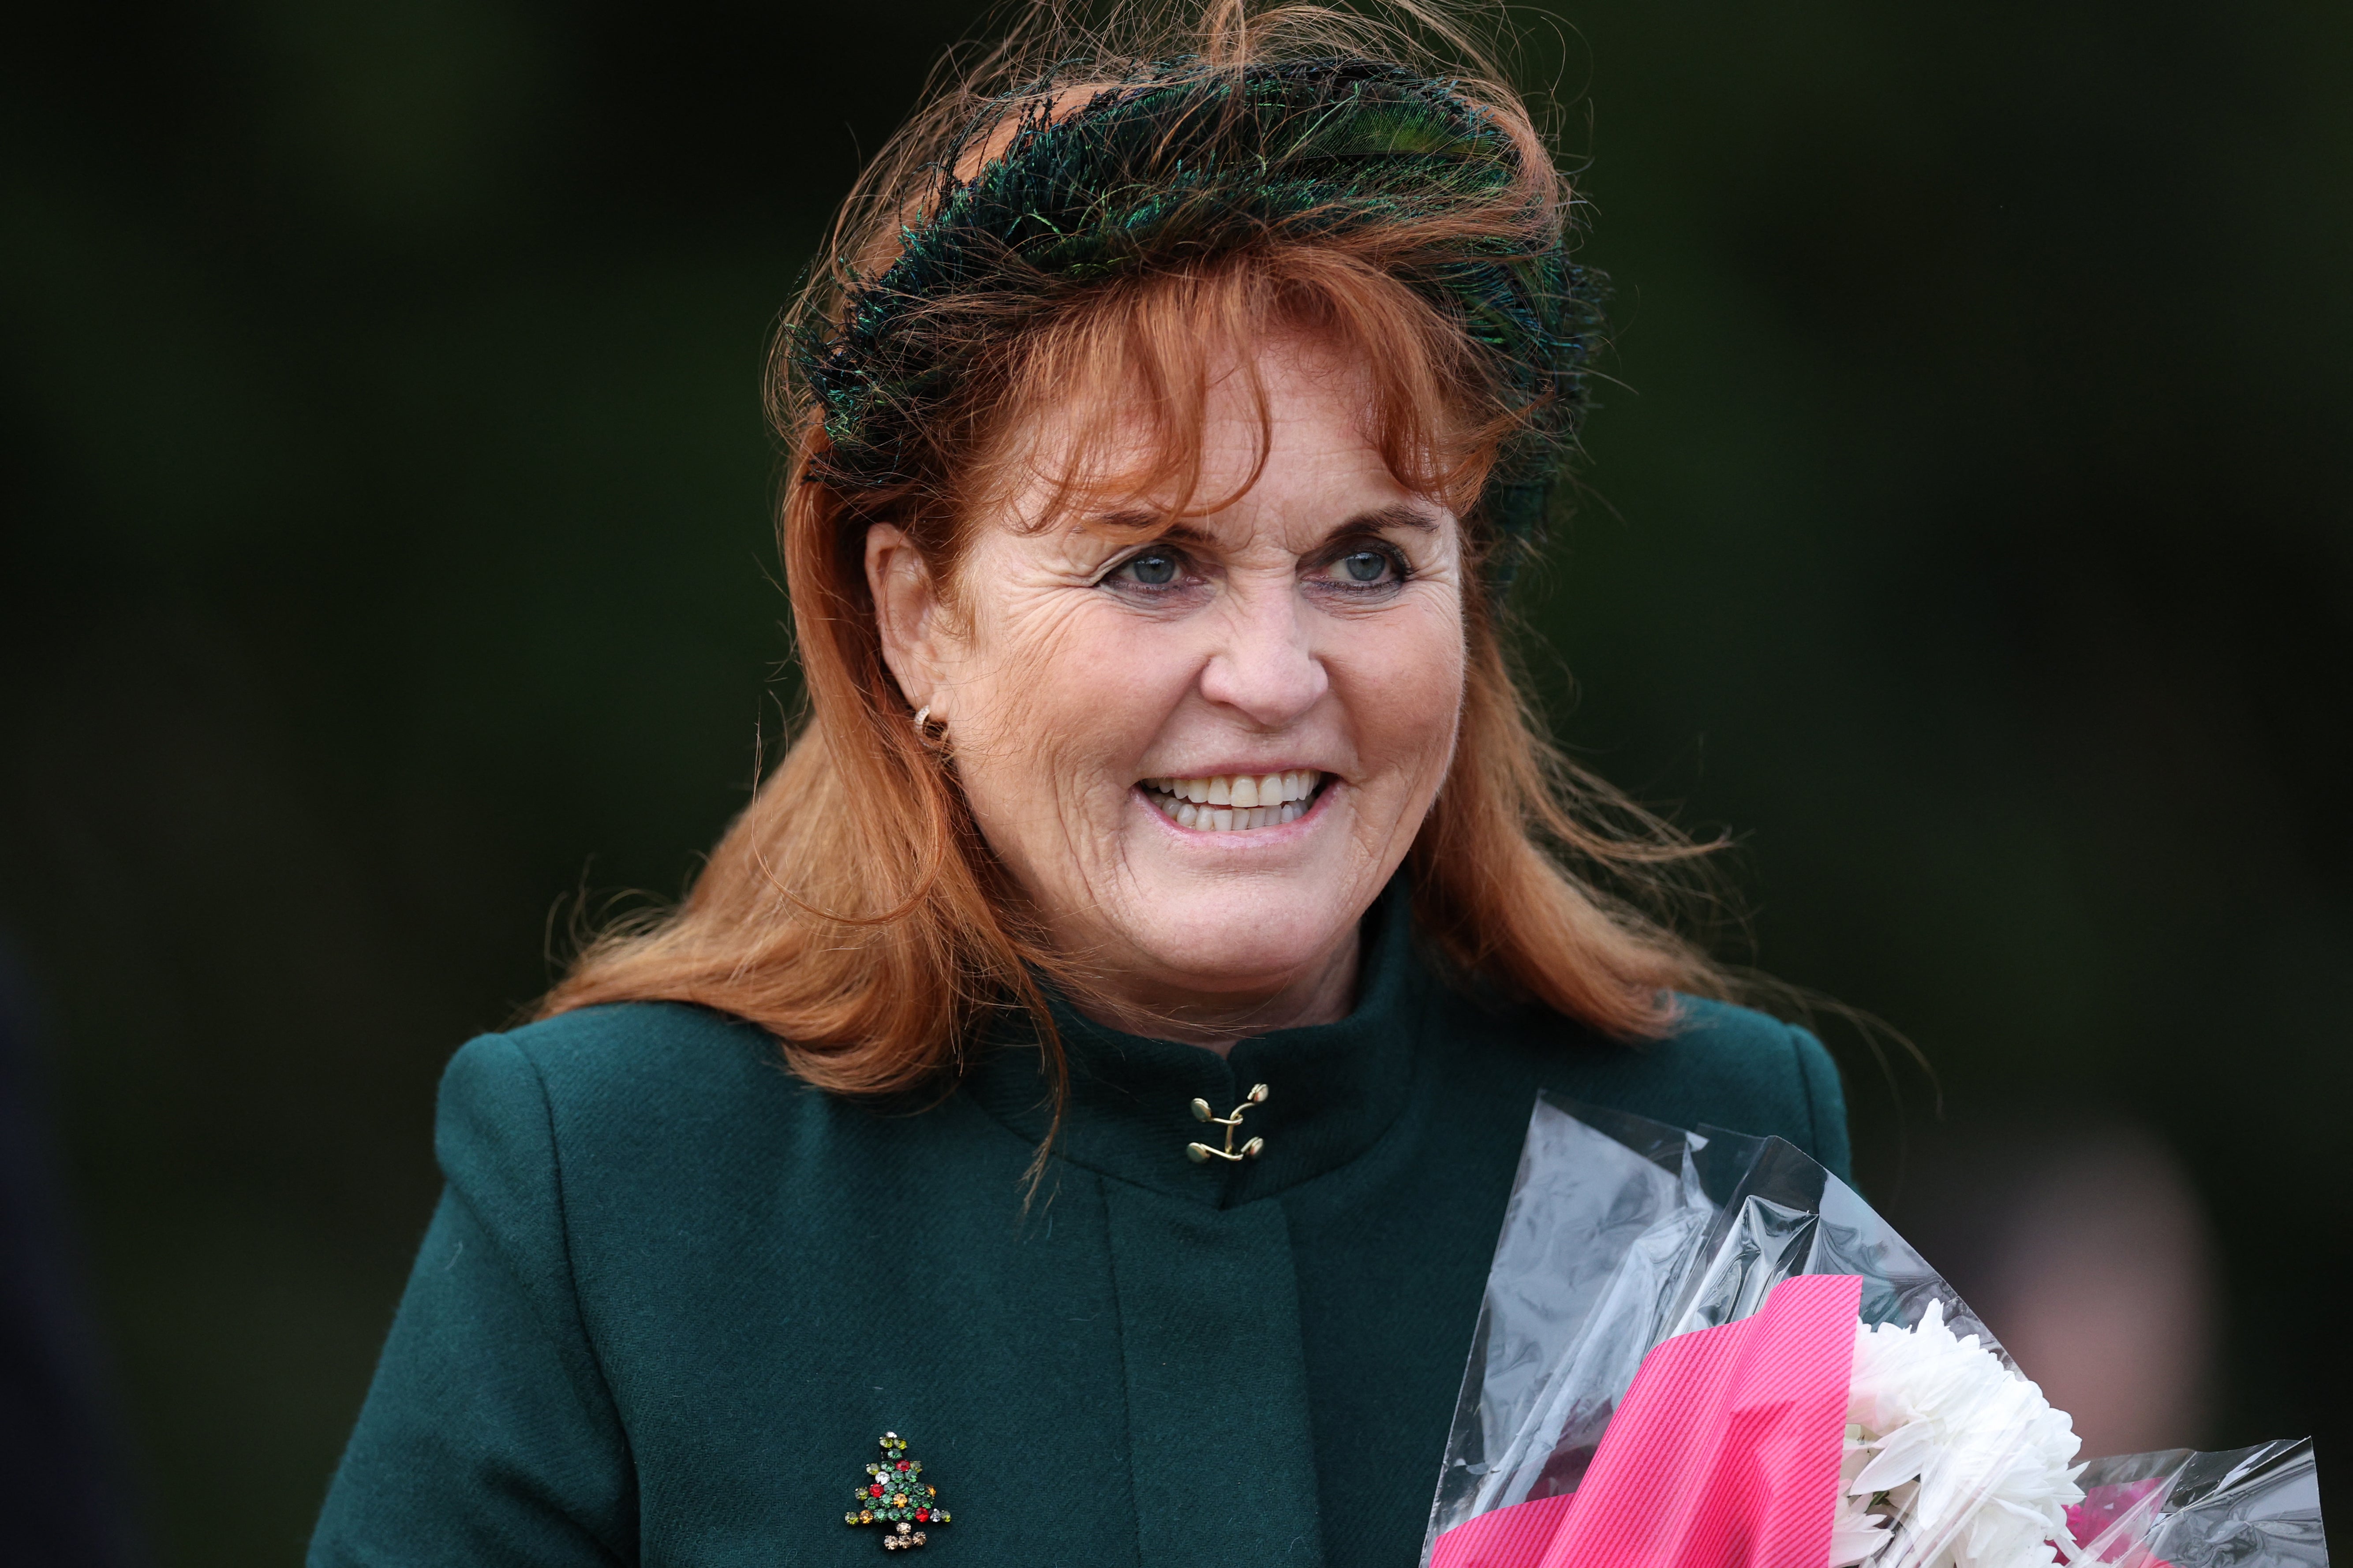 Sarah Ferguson has issued a touching message for the King after both royals were recently diagnosed with cancer